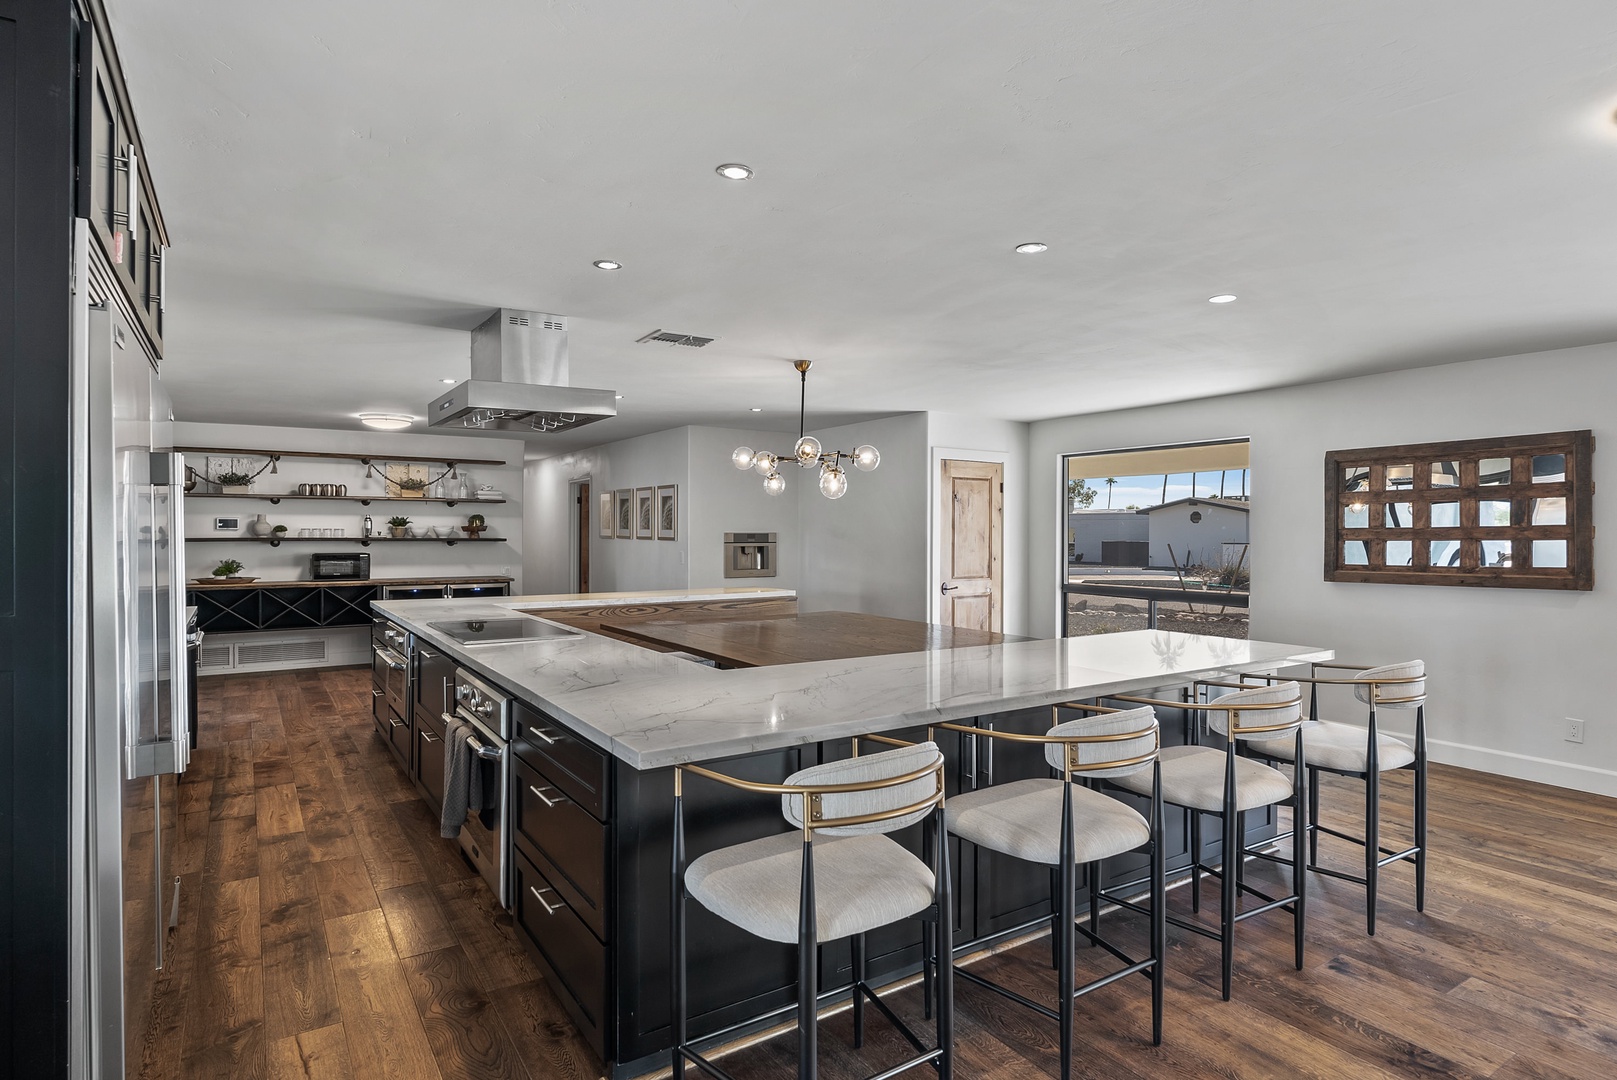 Dining and kitchen area with booth-style seating and full culinary amenities